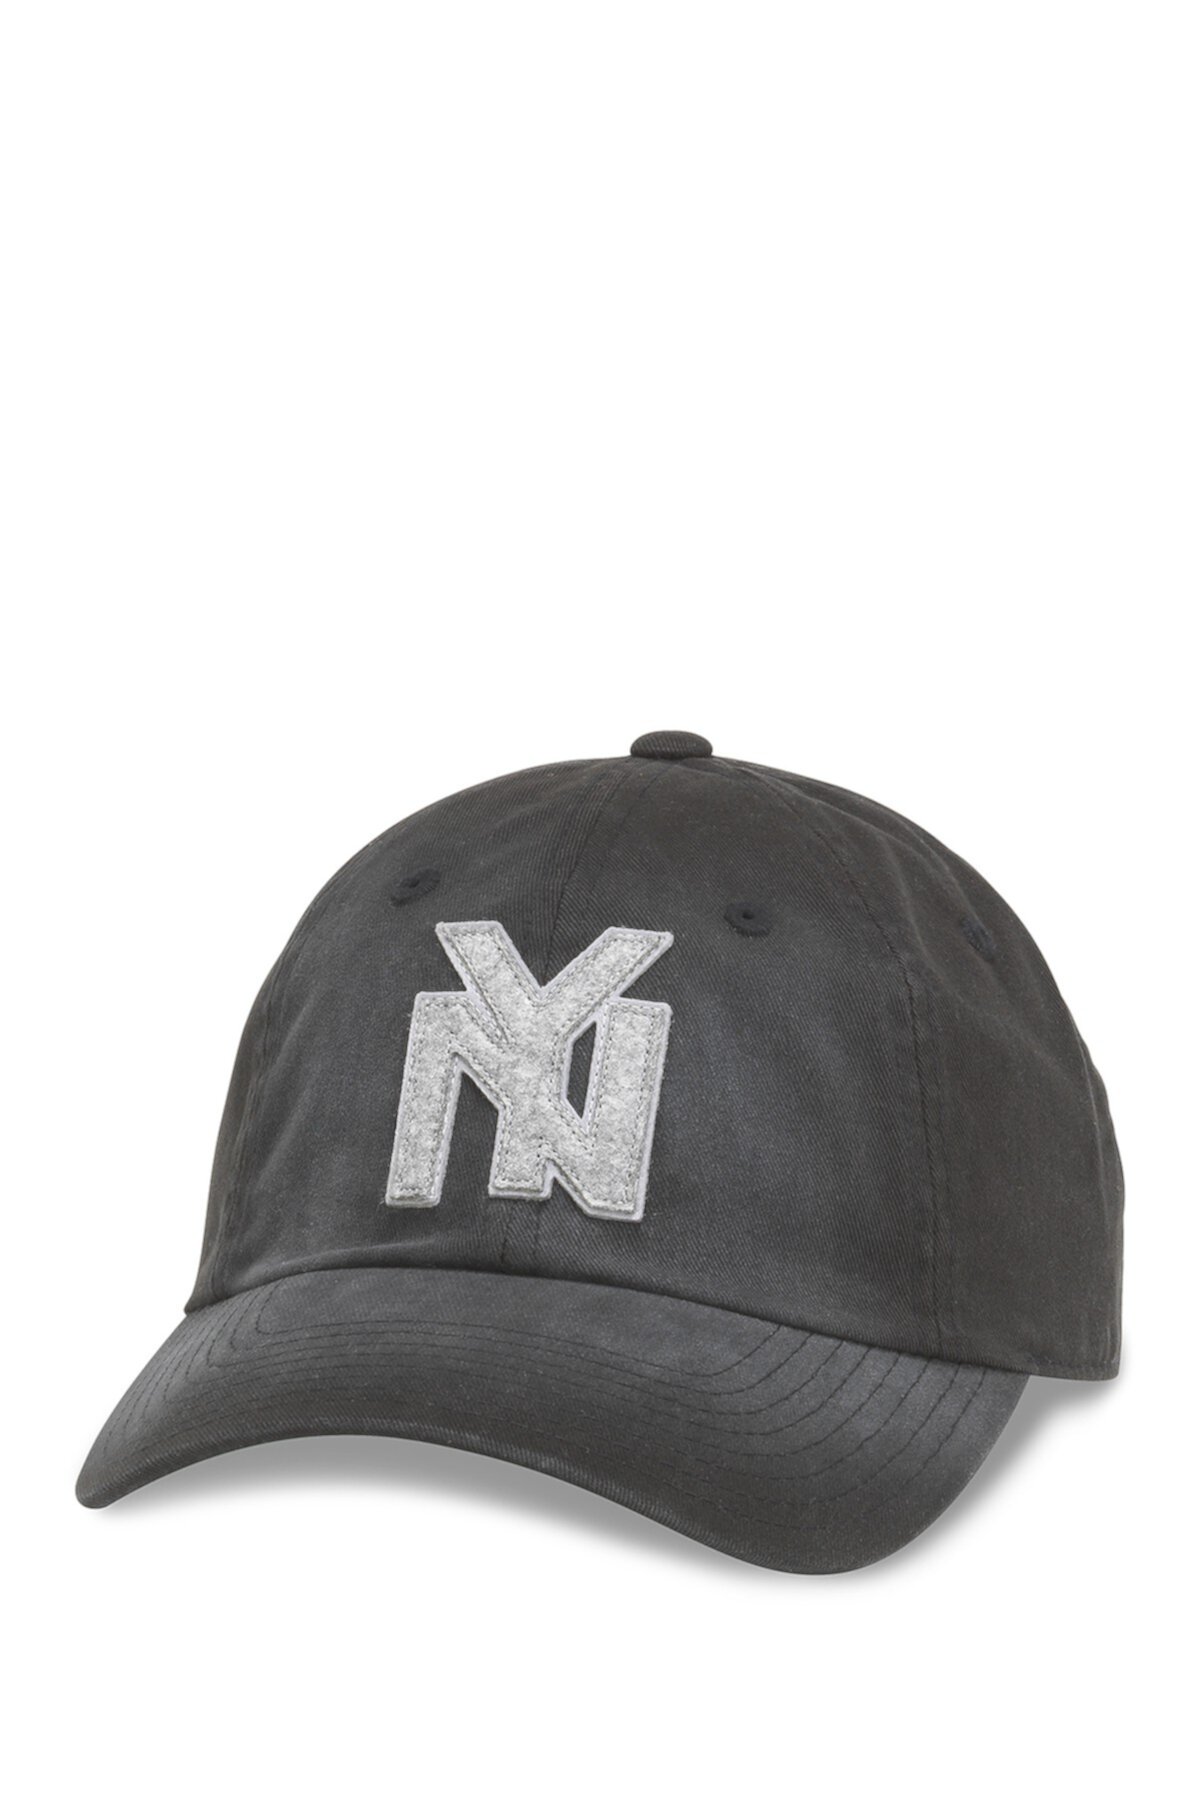 Кепка Luther NY Yankees American Needle